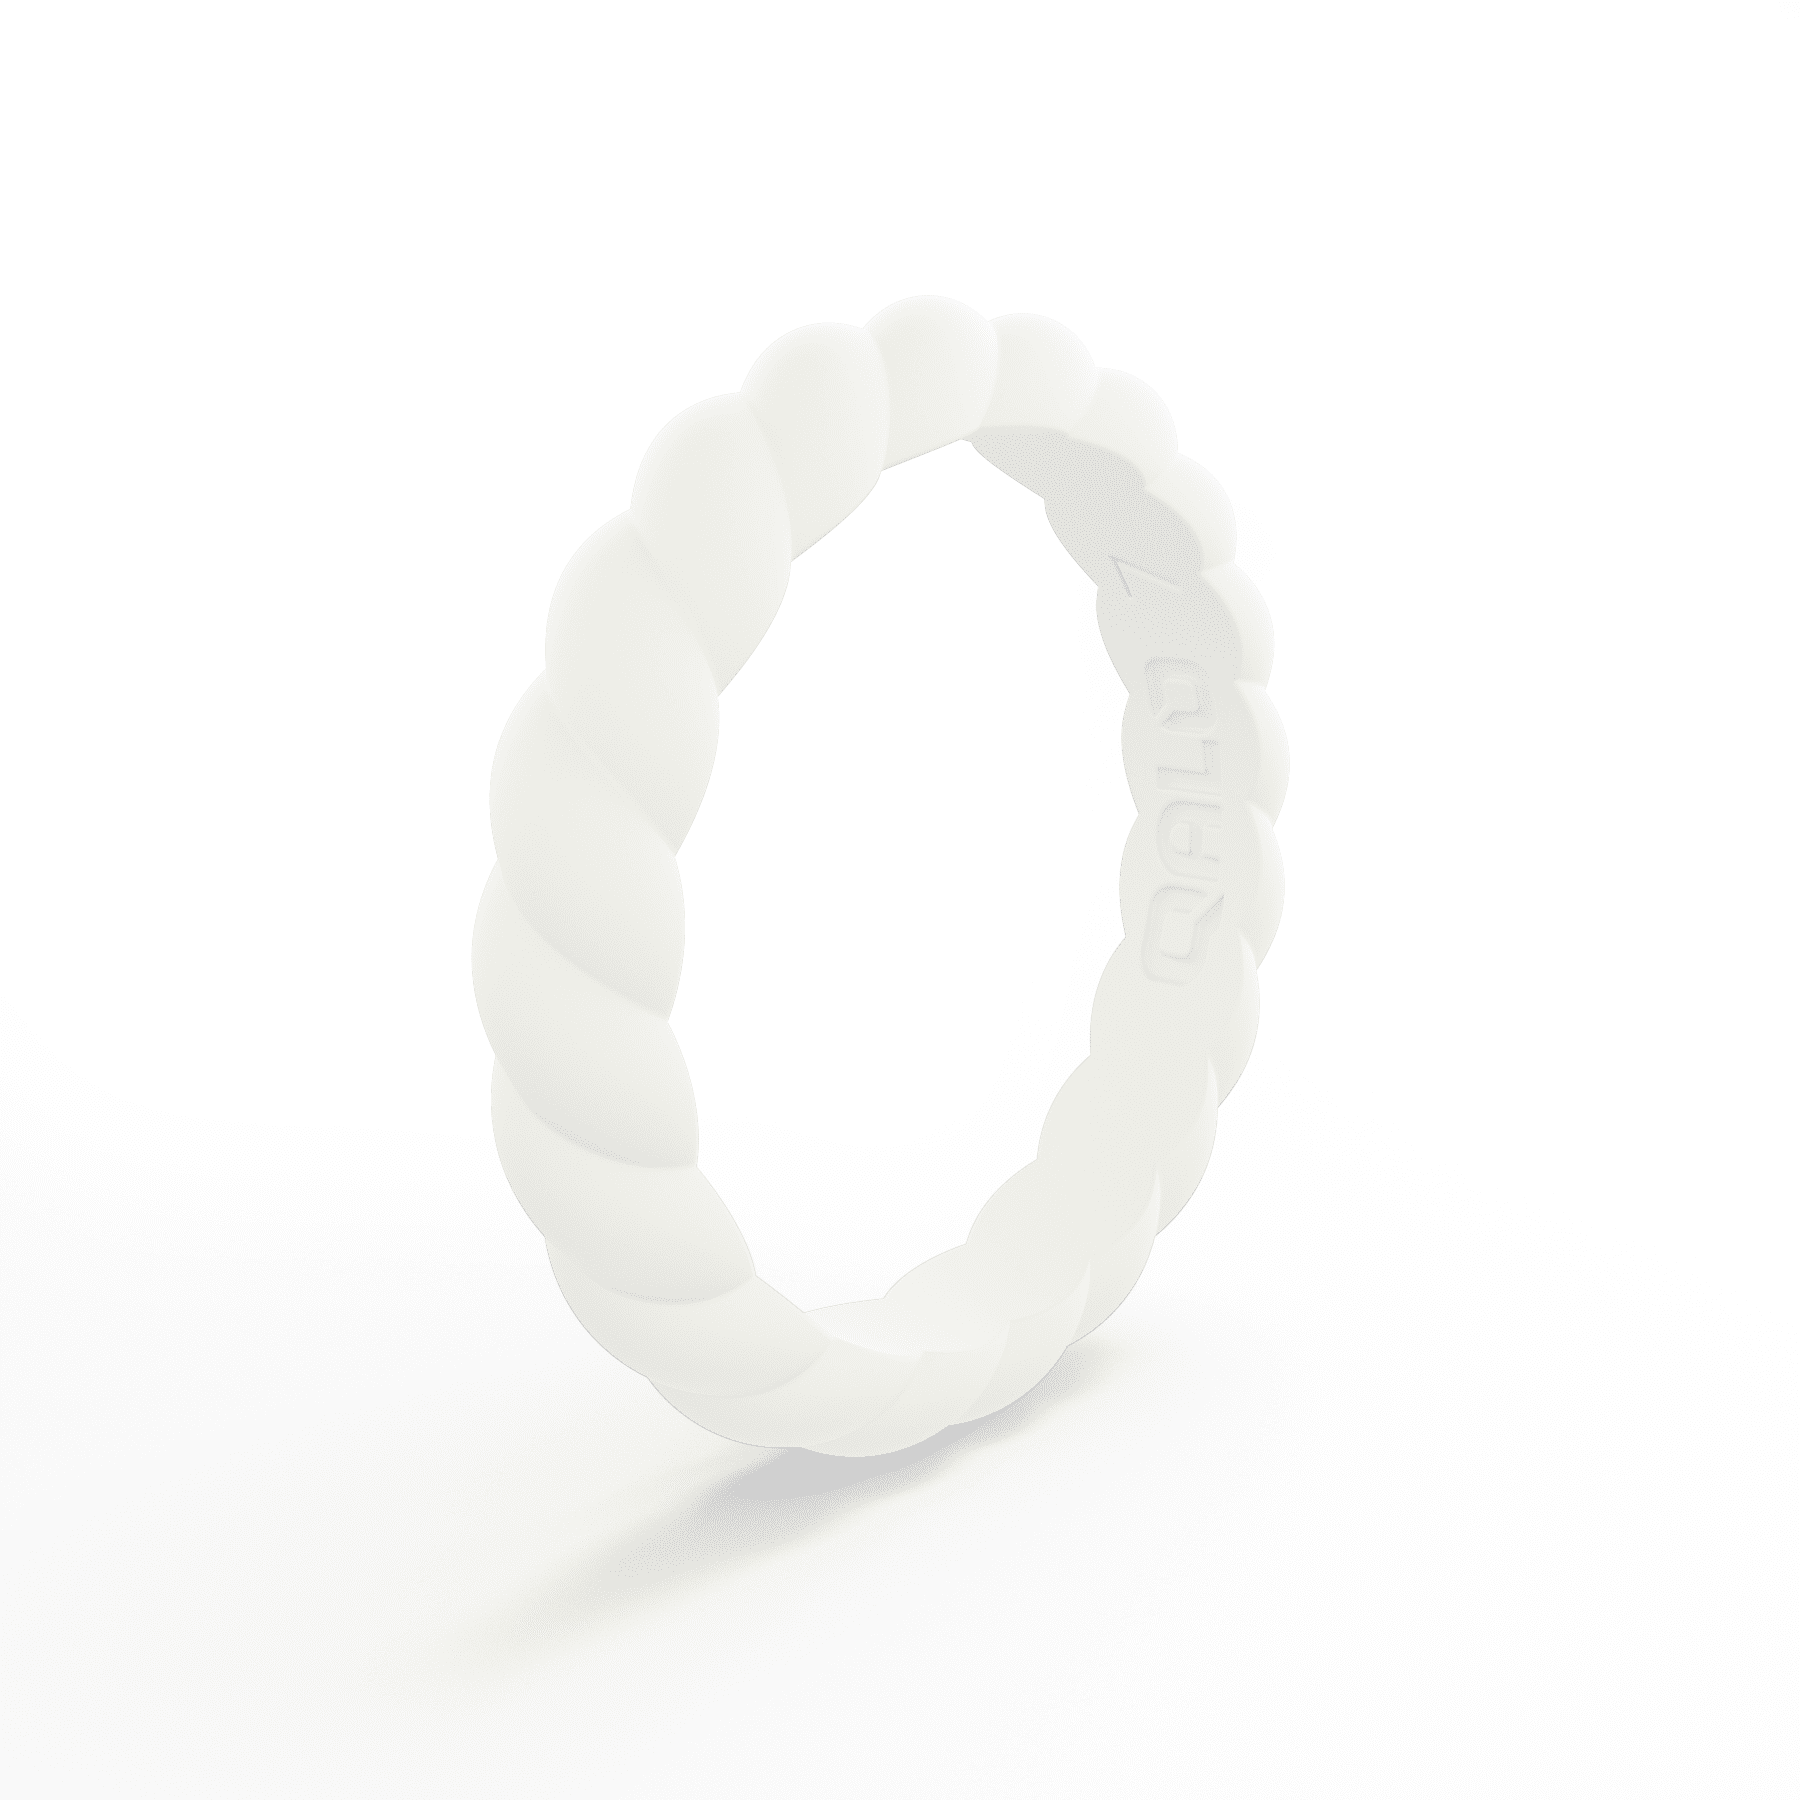 The Qalo Wedding Ring and How It Can Help Prevent Serious Injuries